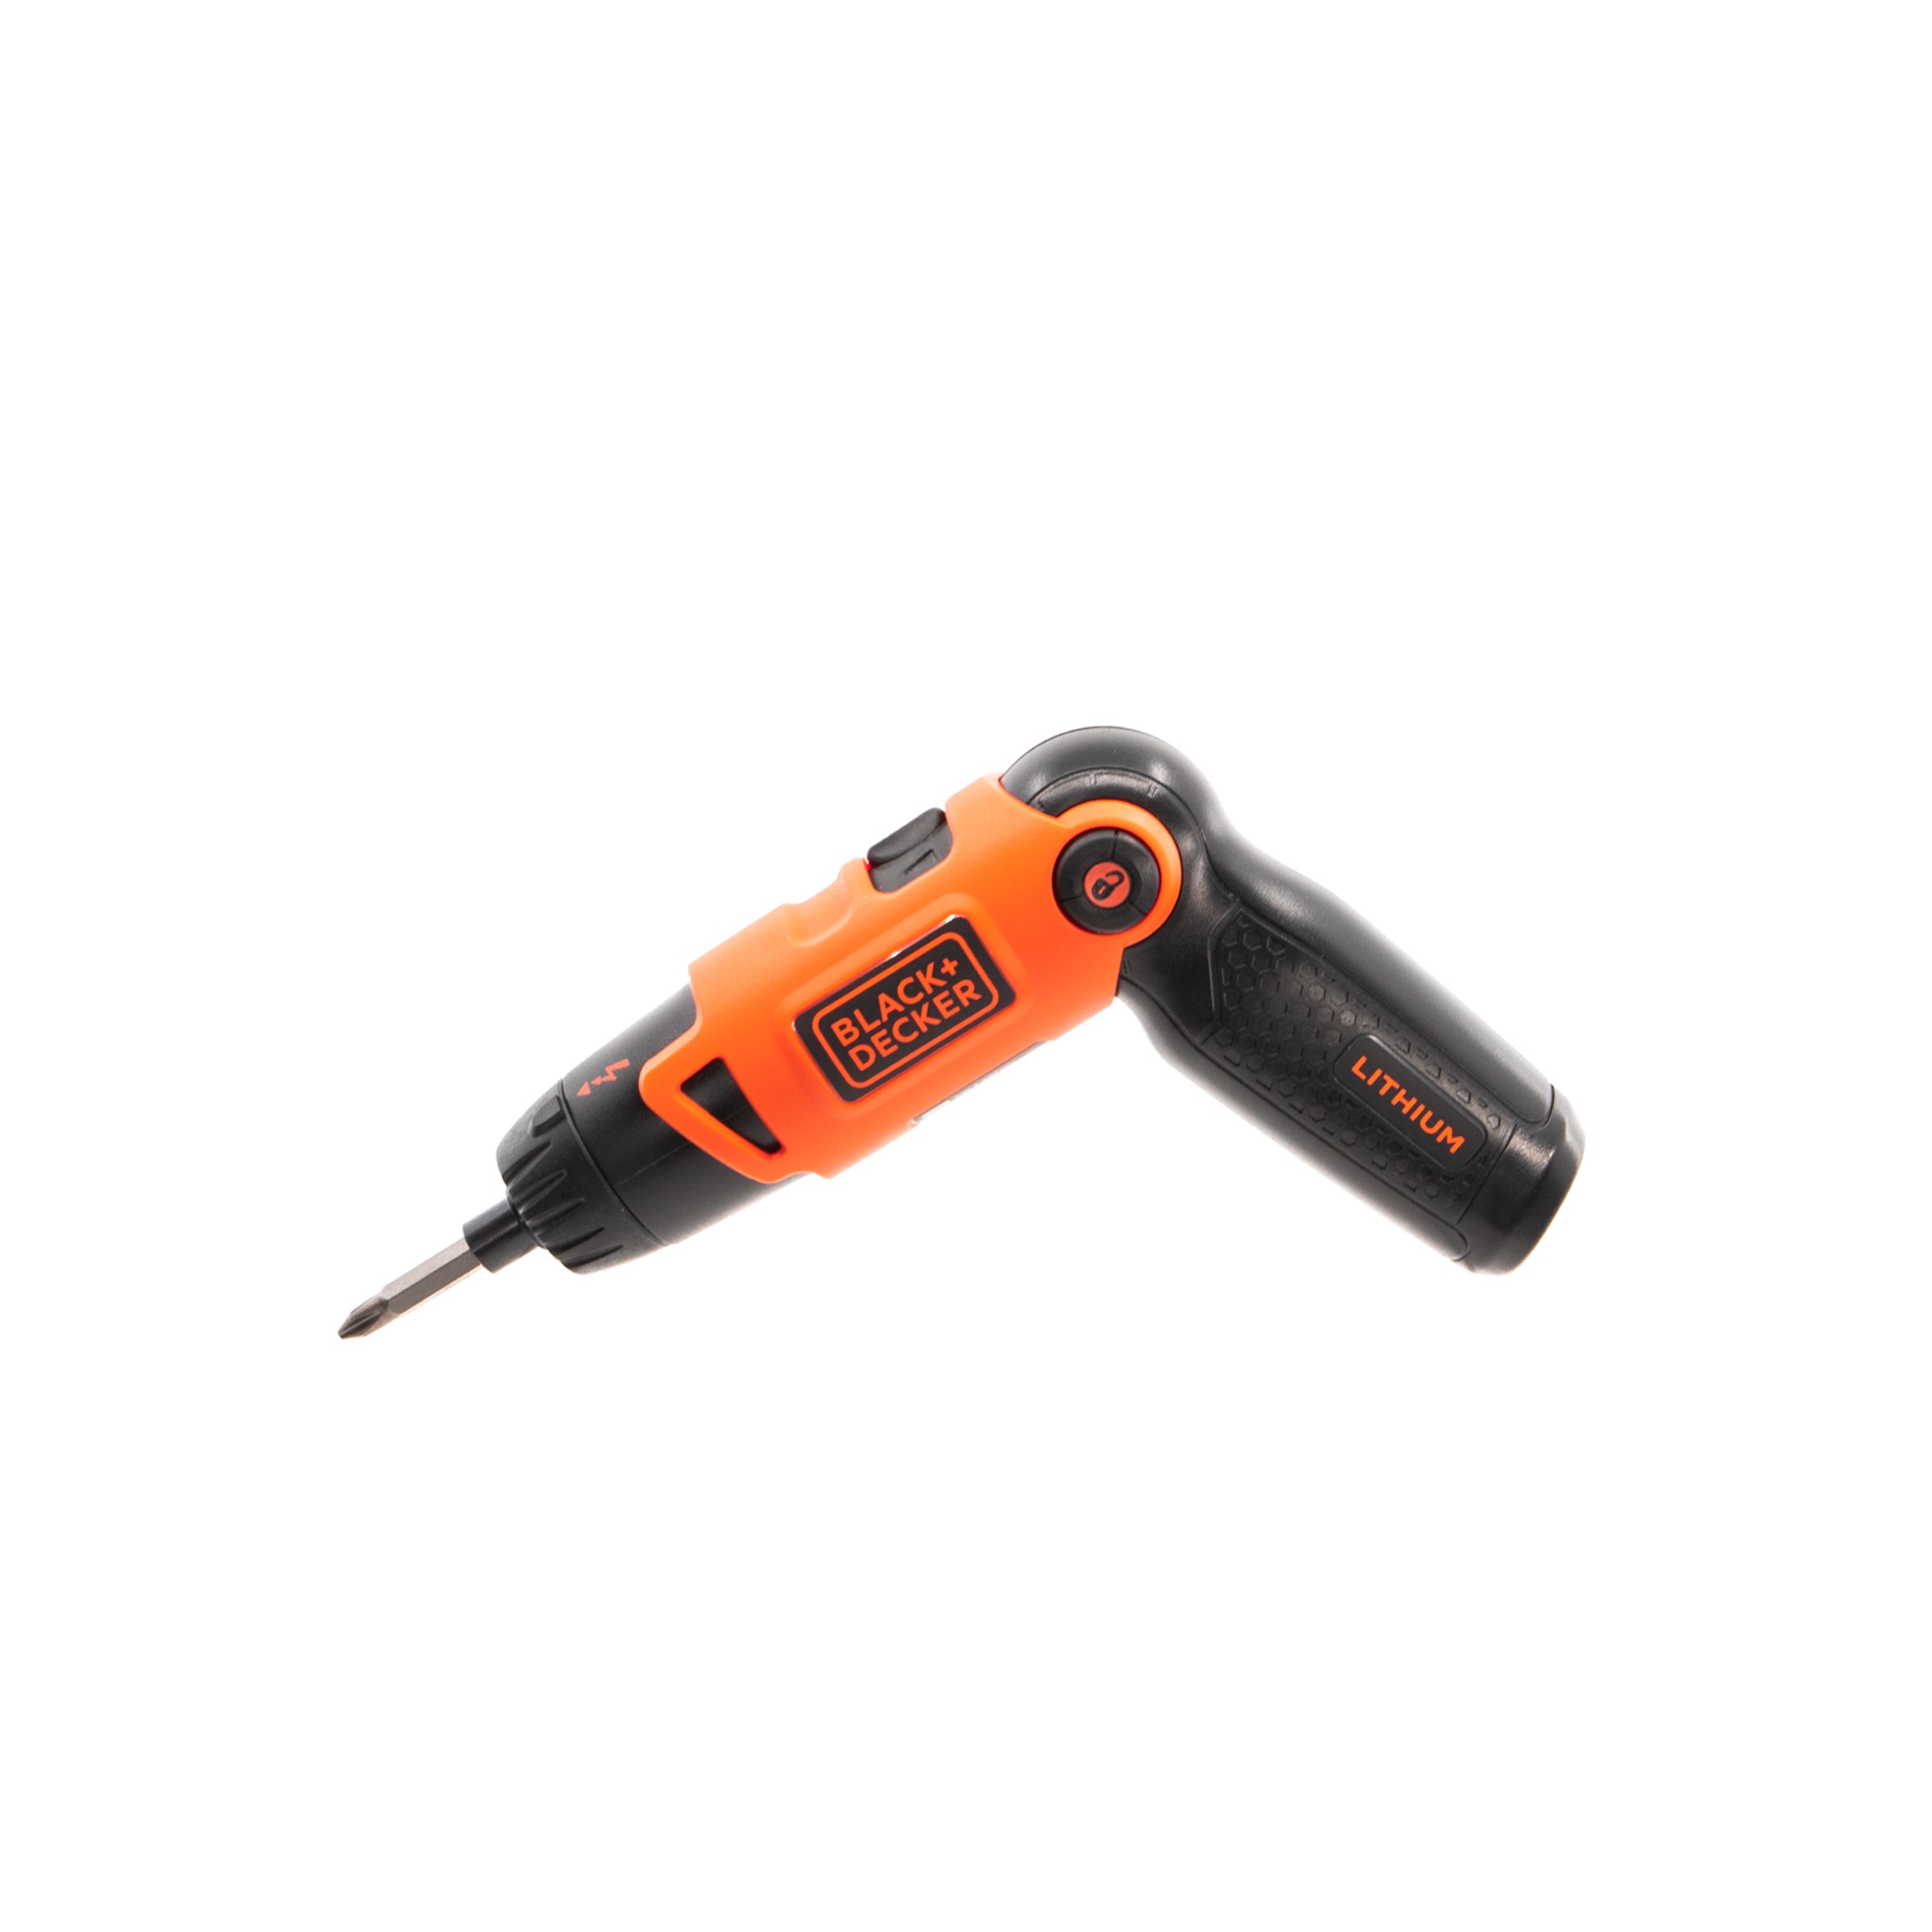 Charger for Black and Decker cordless screwdriver